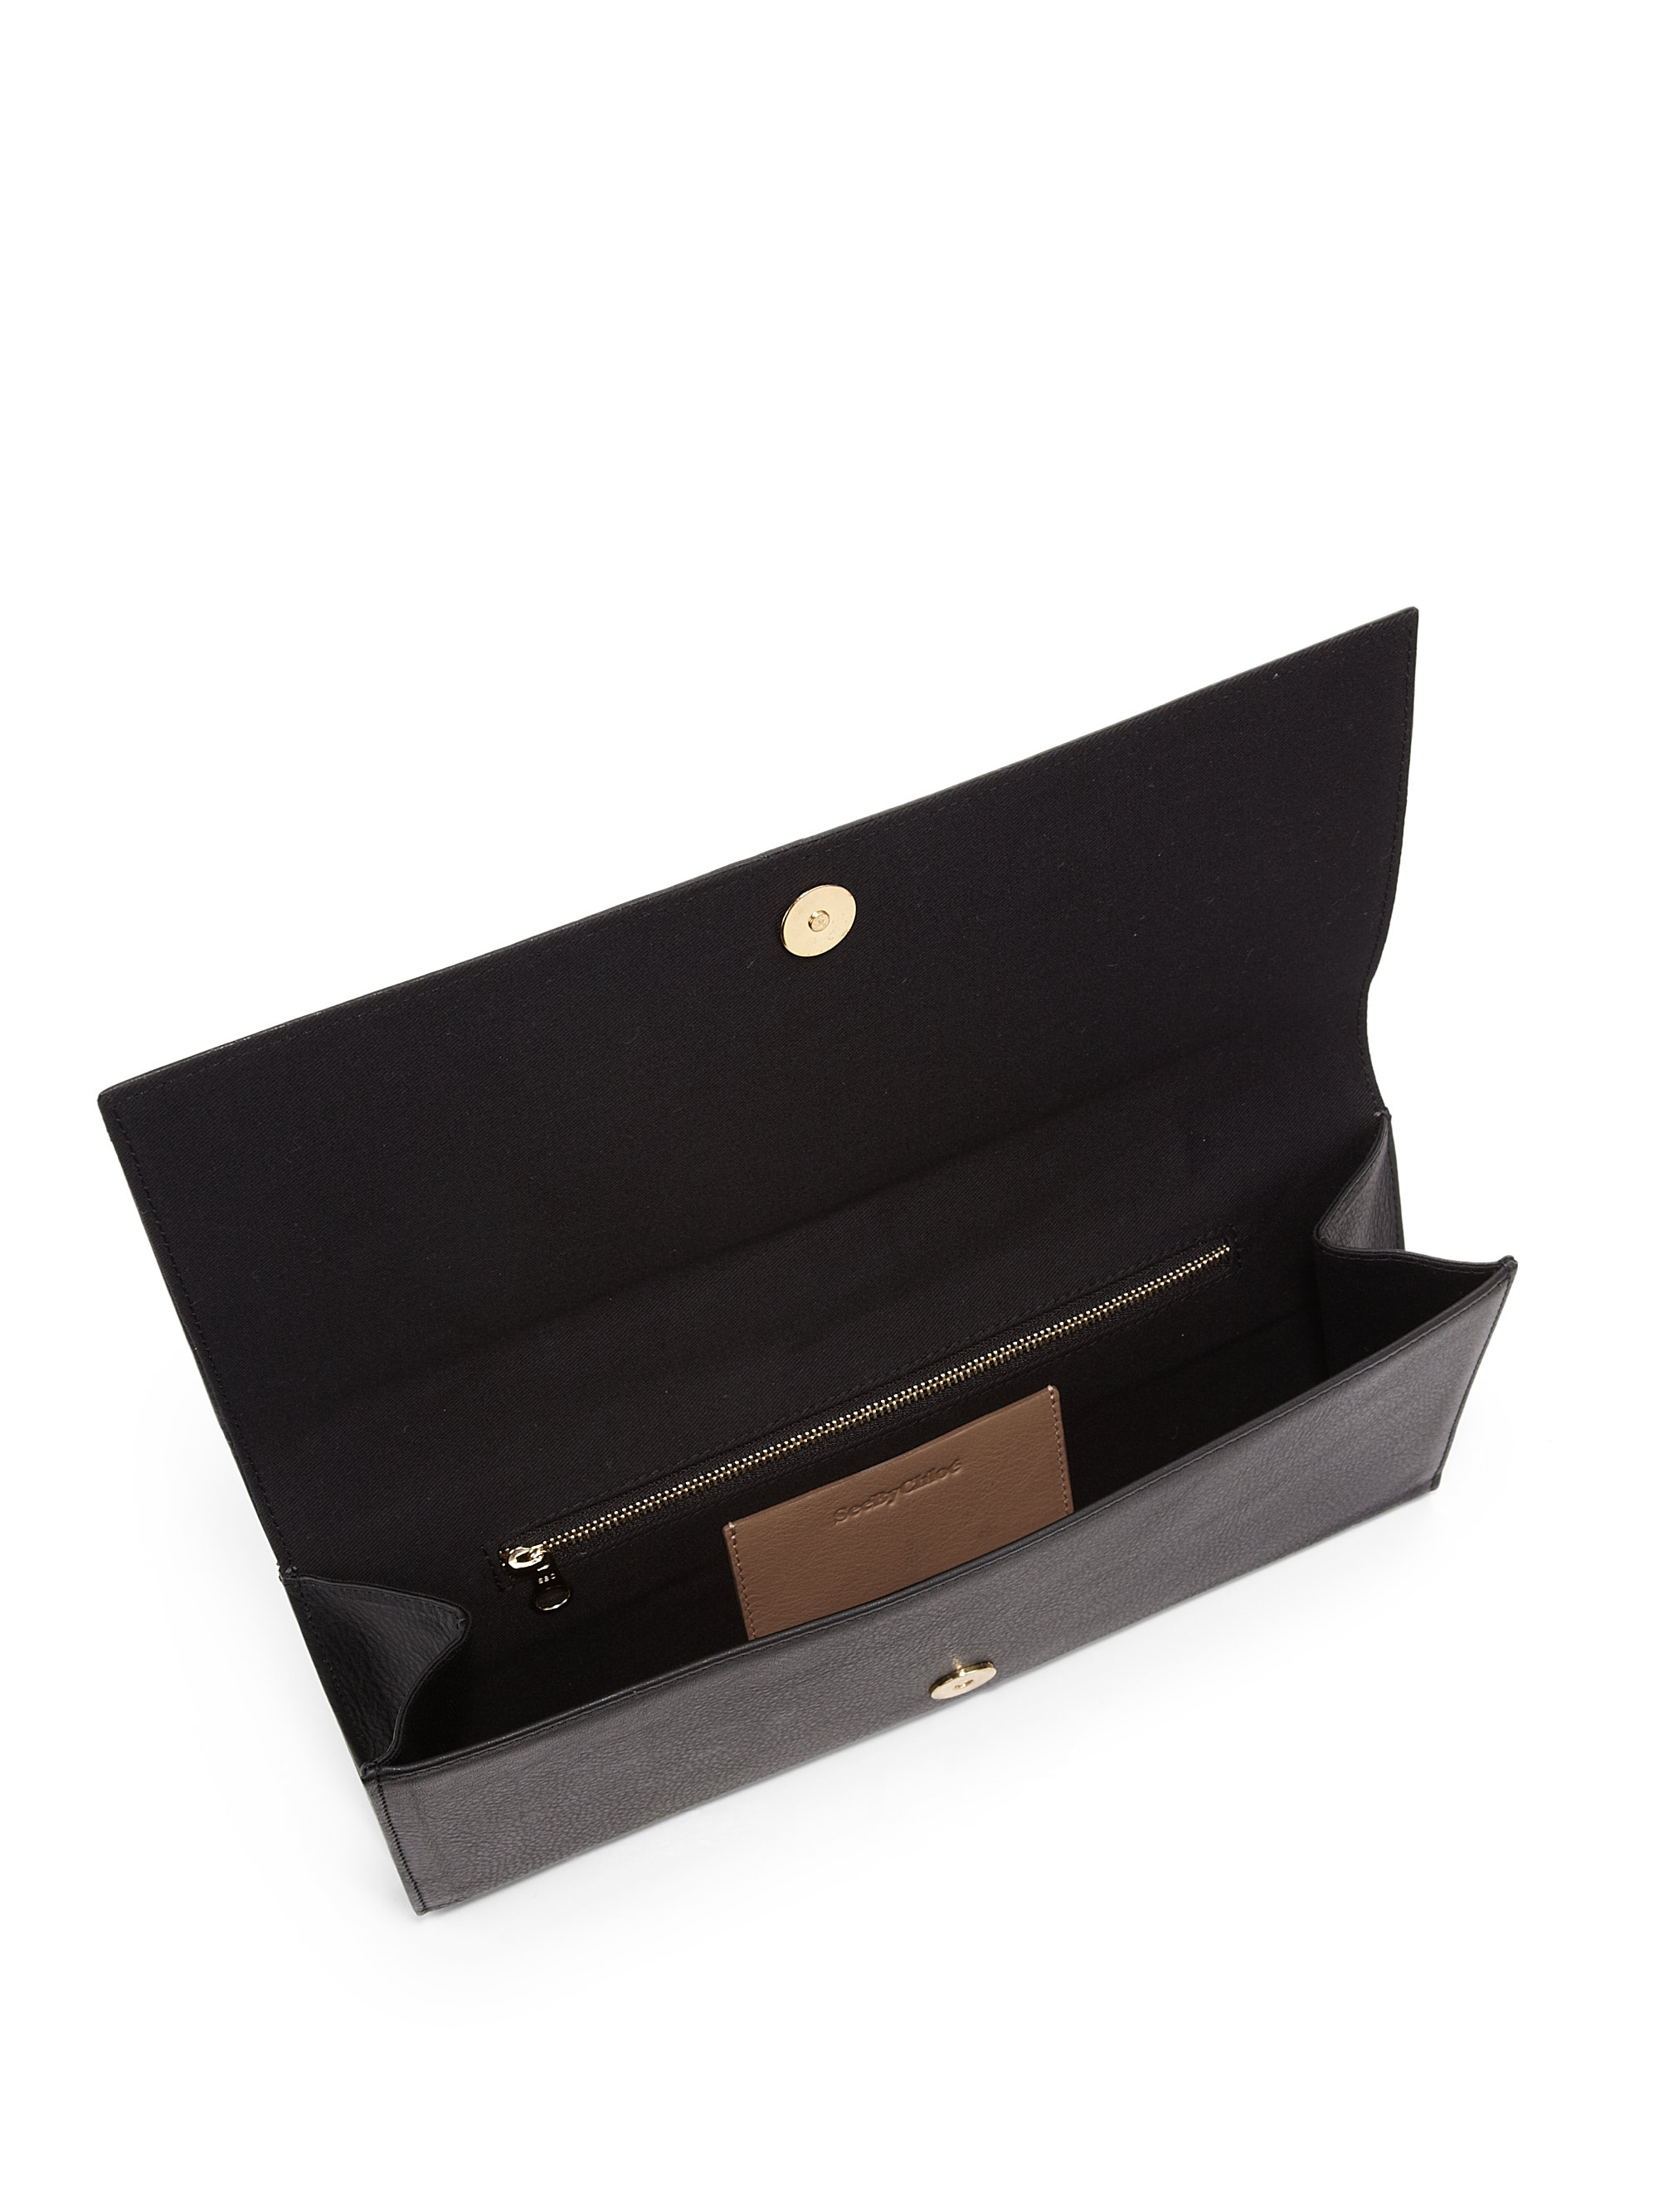 See by chlo Nora Bow Clutch in Black | Lyst